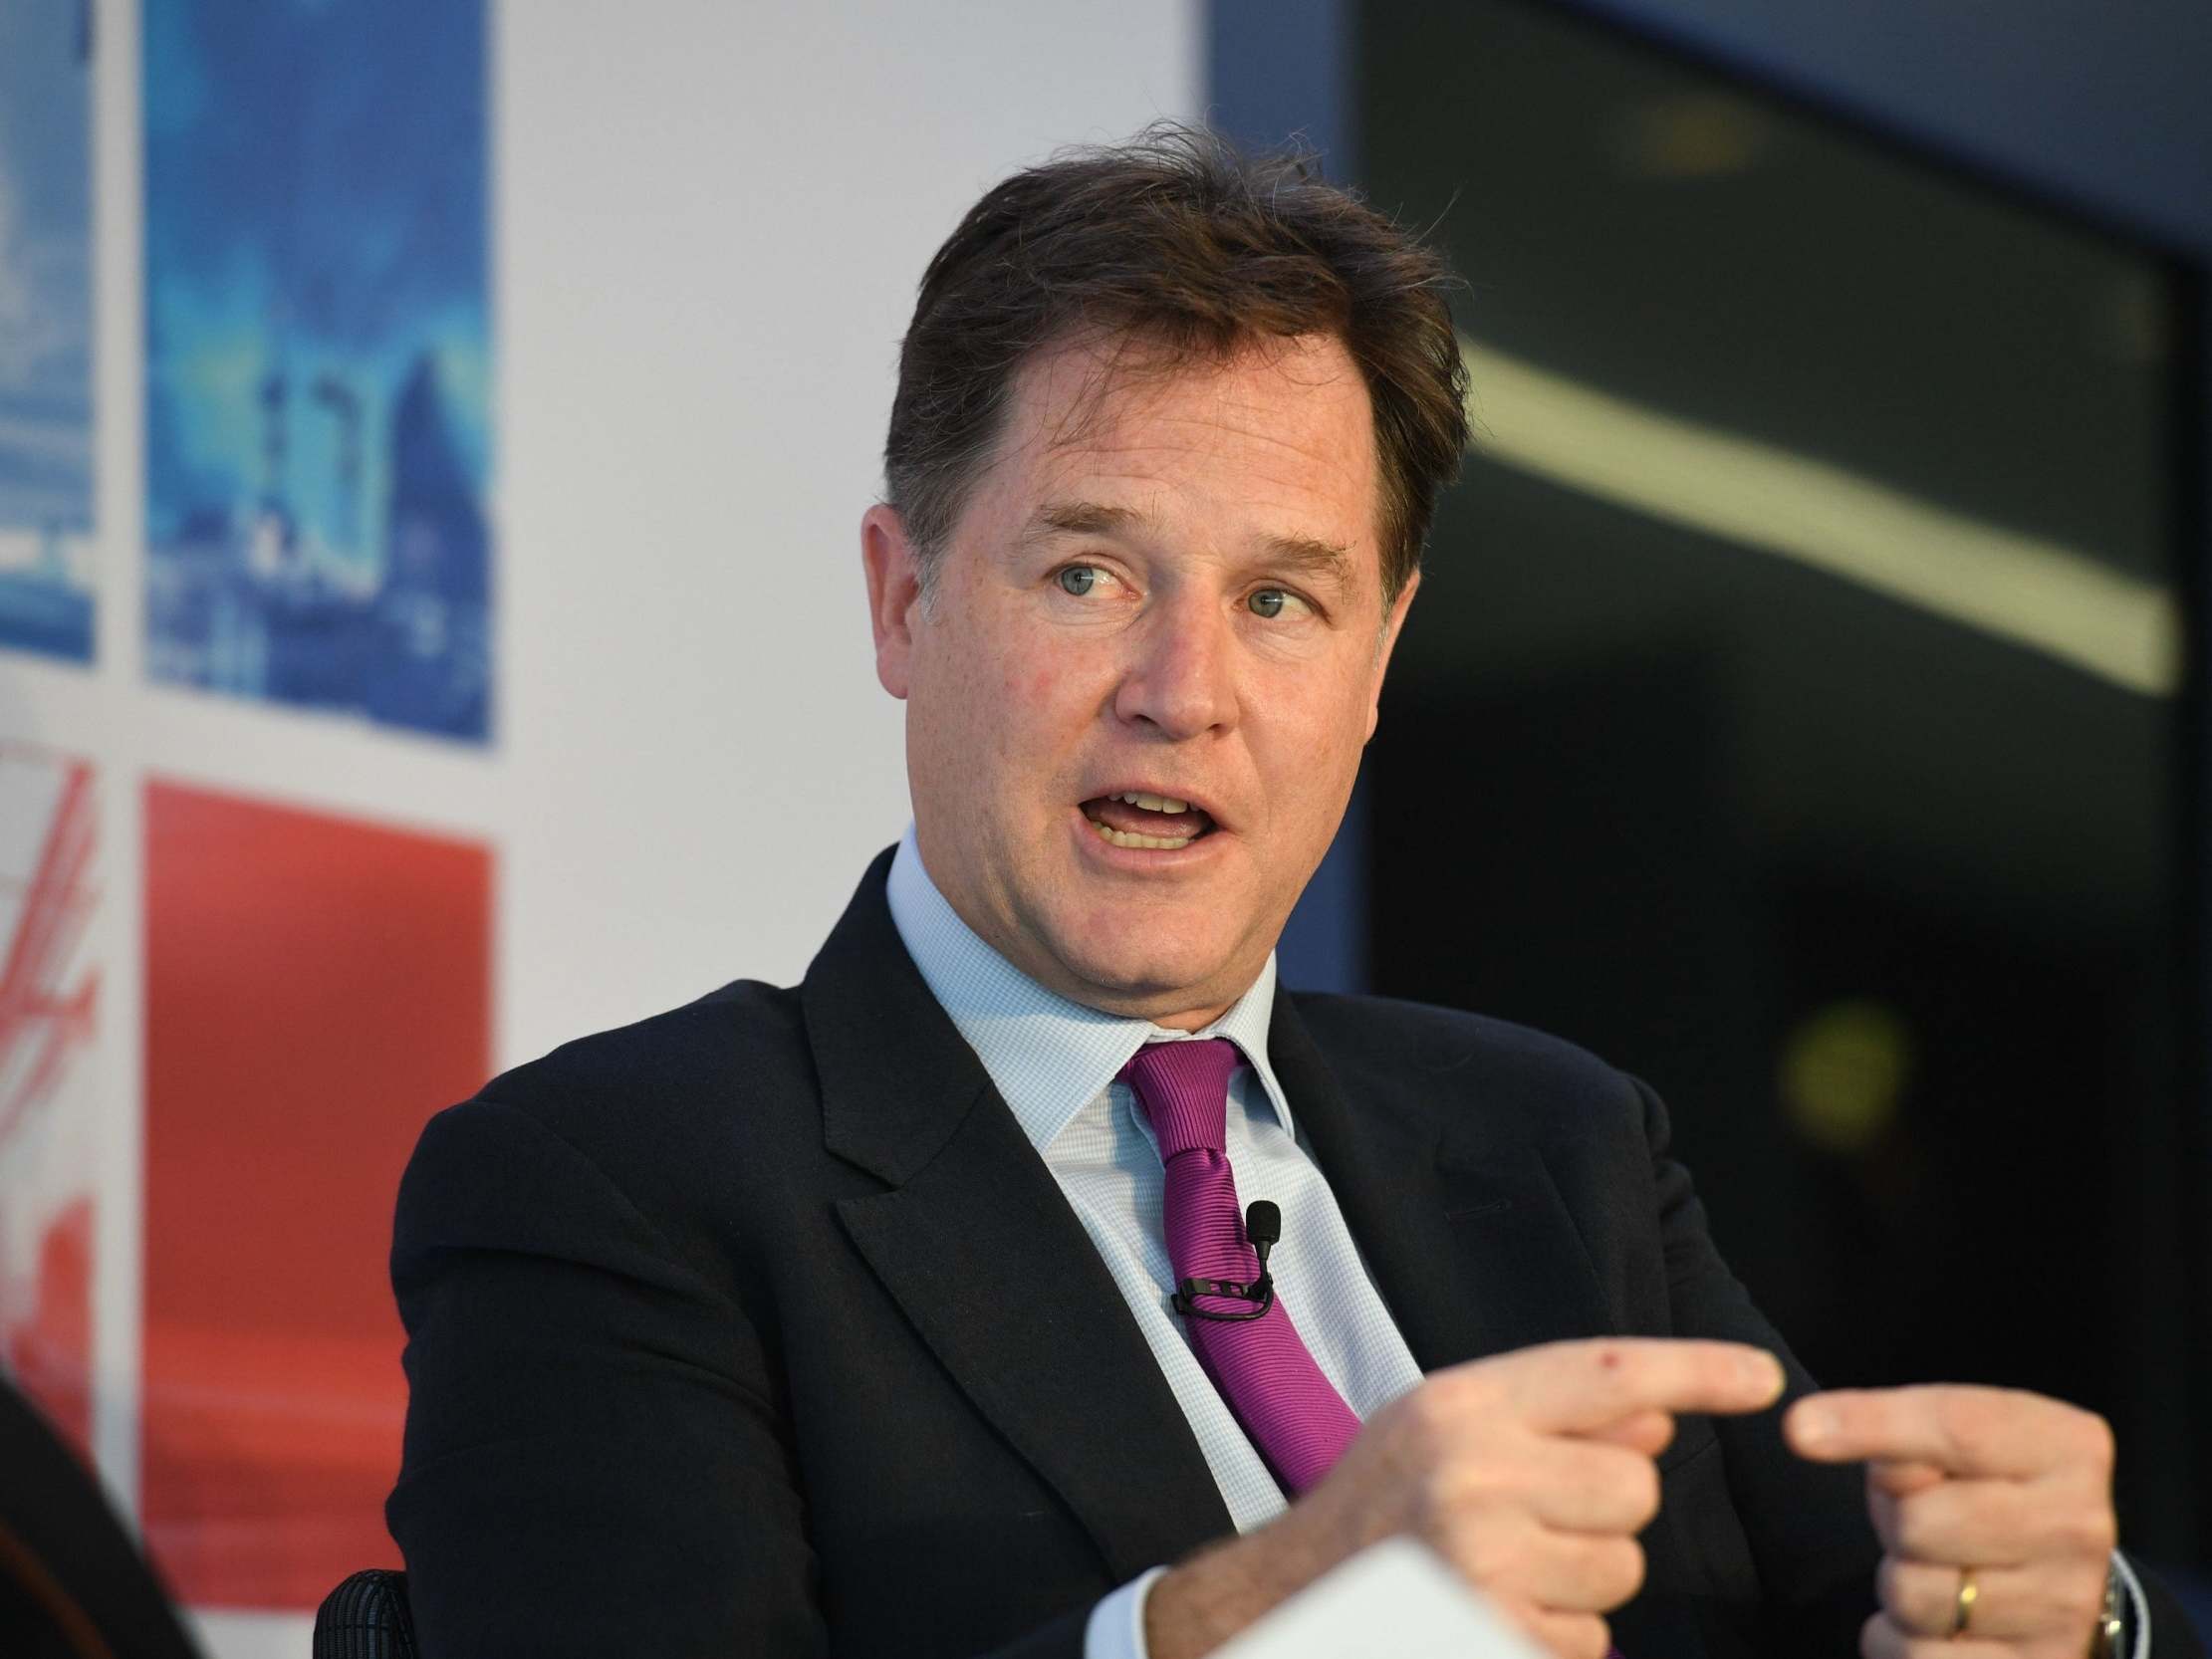 Nick Clegg famously pledged to not increase university tuition fees